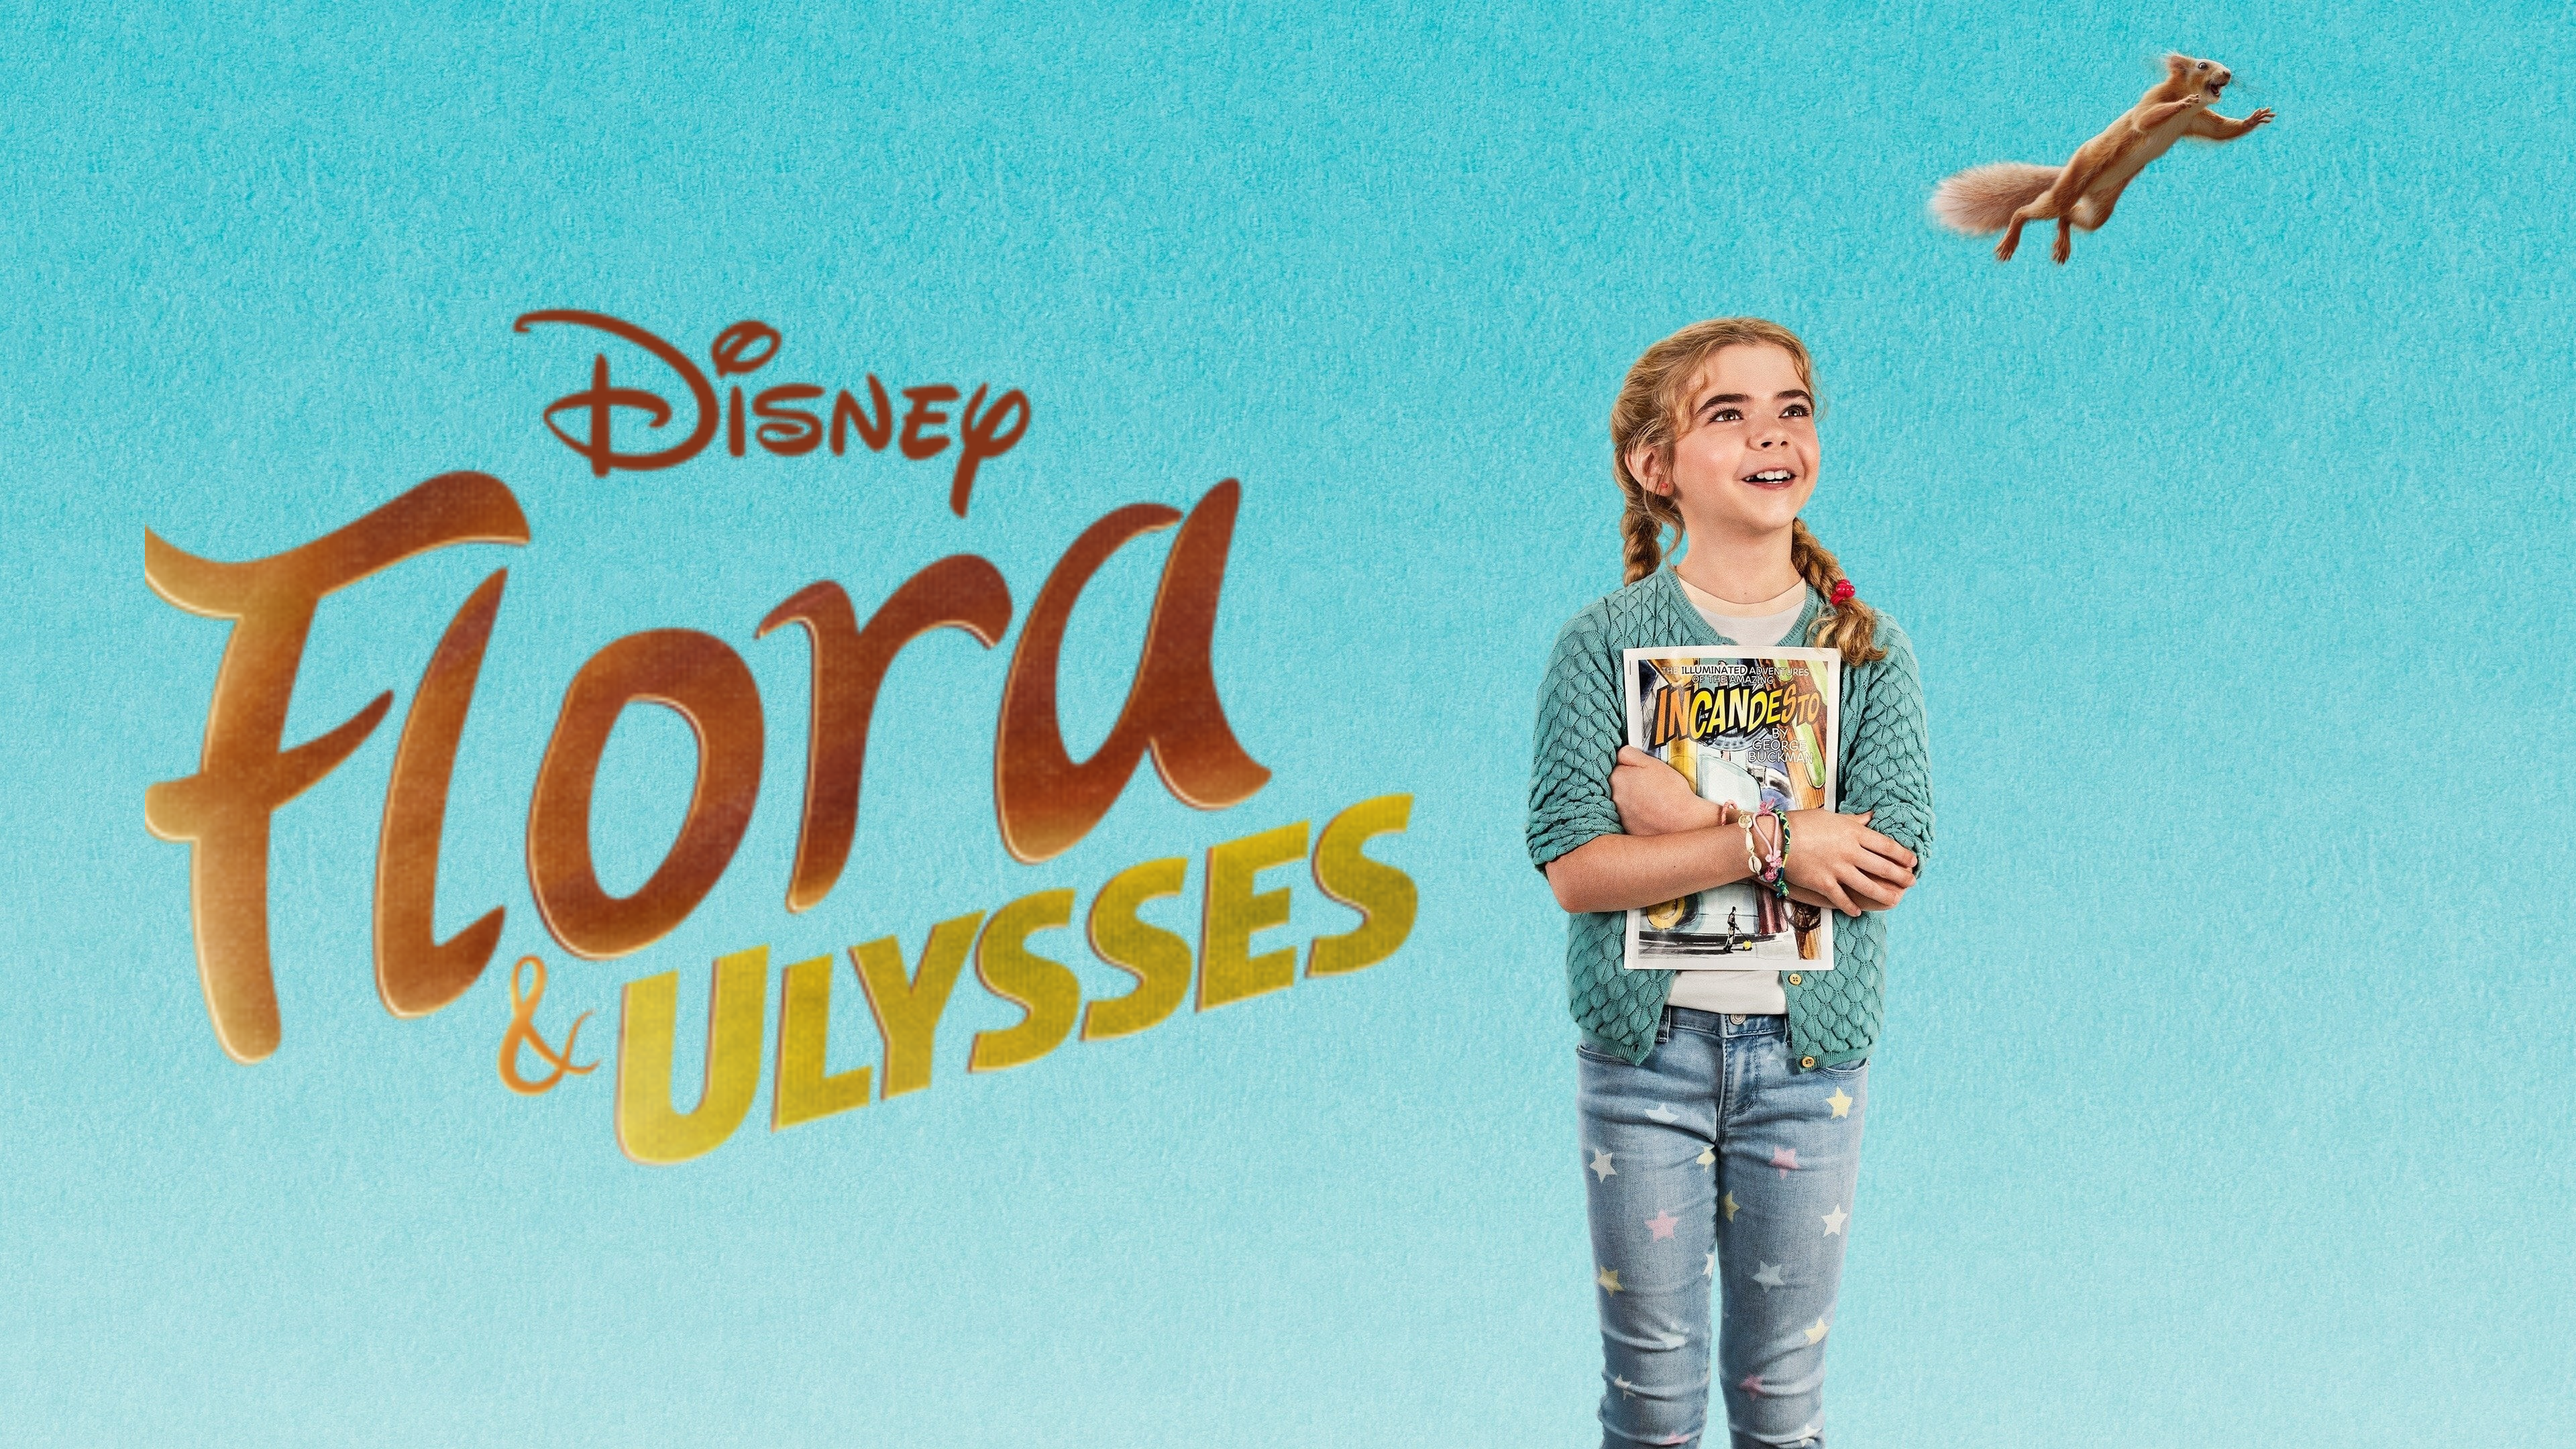 ‘Flora & Ulysses’ Is A Wonderful Family Adventure That Embraces The Power of Comics – Review